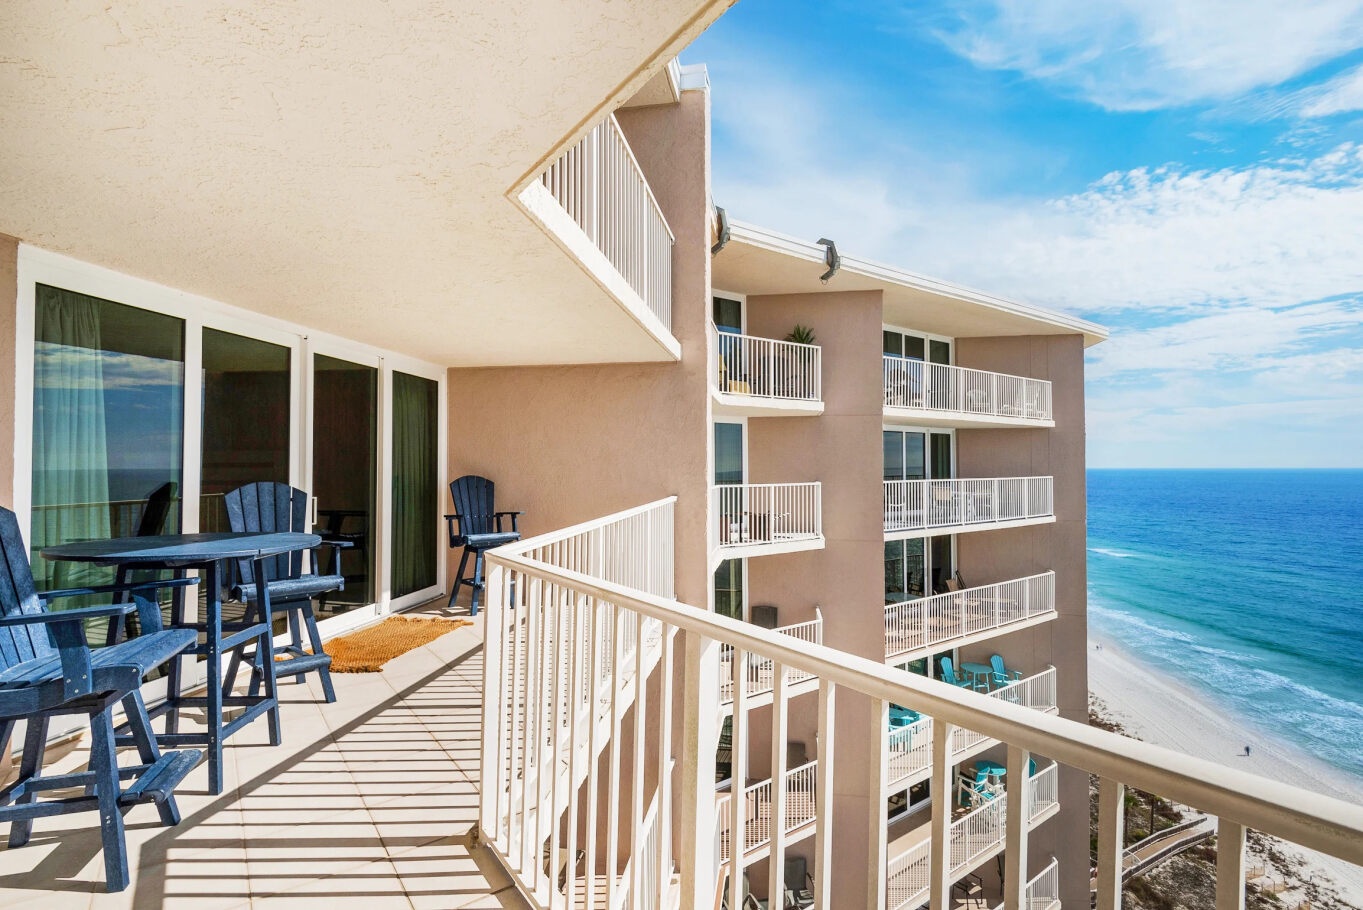 Enjoy stunning ocean views from your very own private balcony